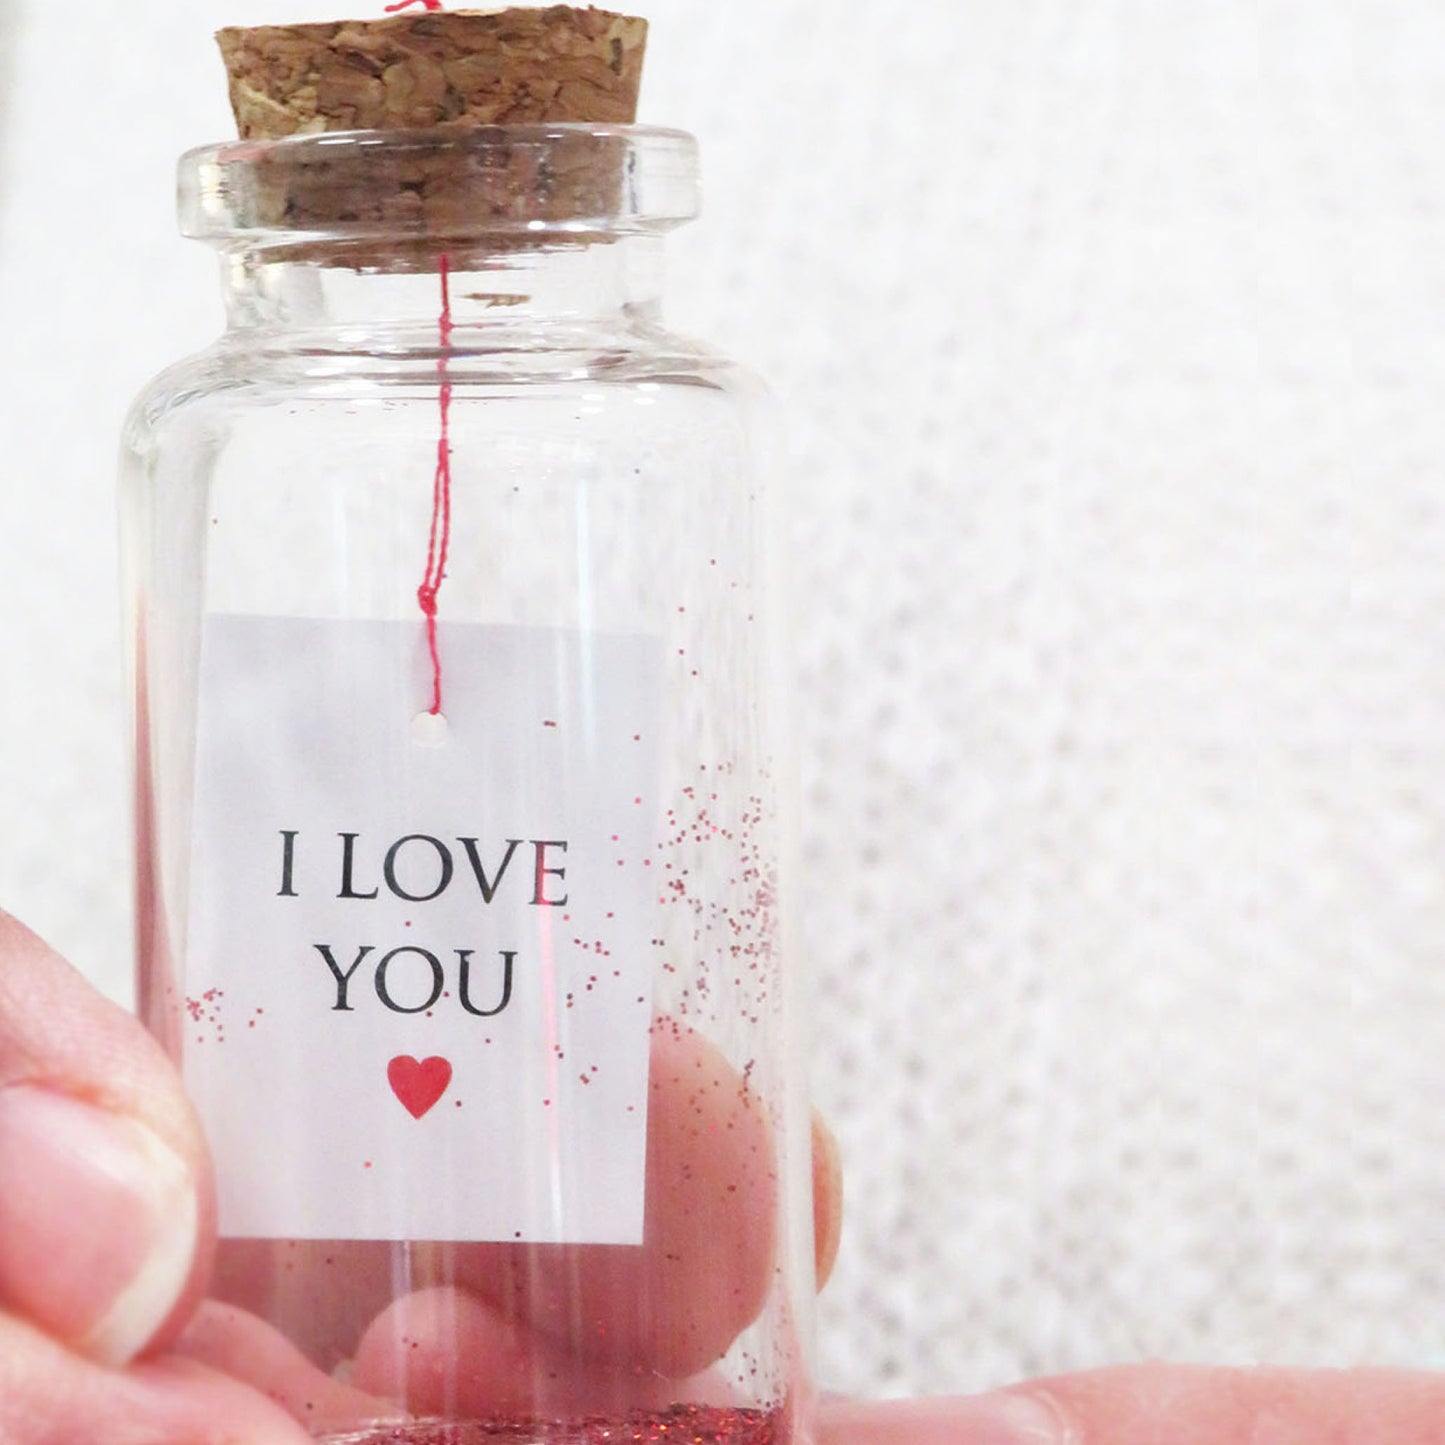 I Love You Tiny Message in a Bottle